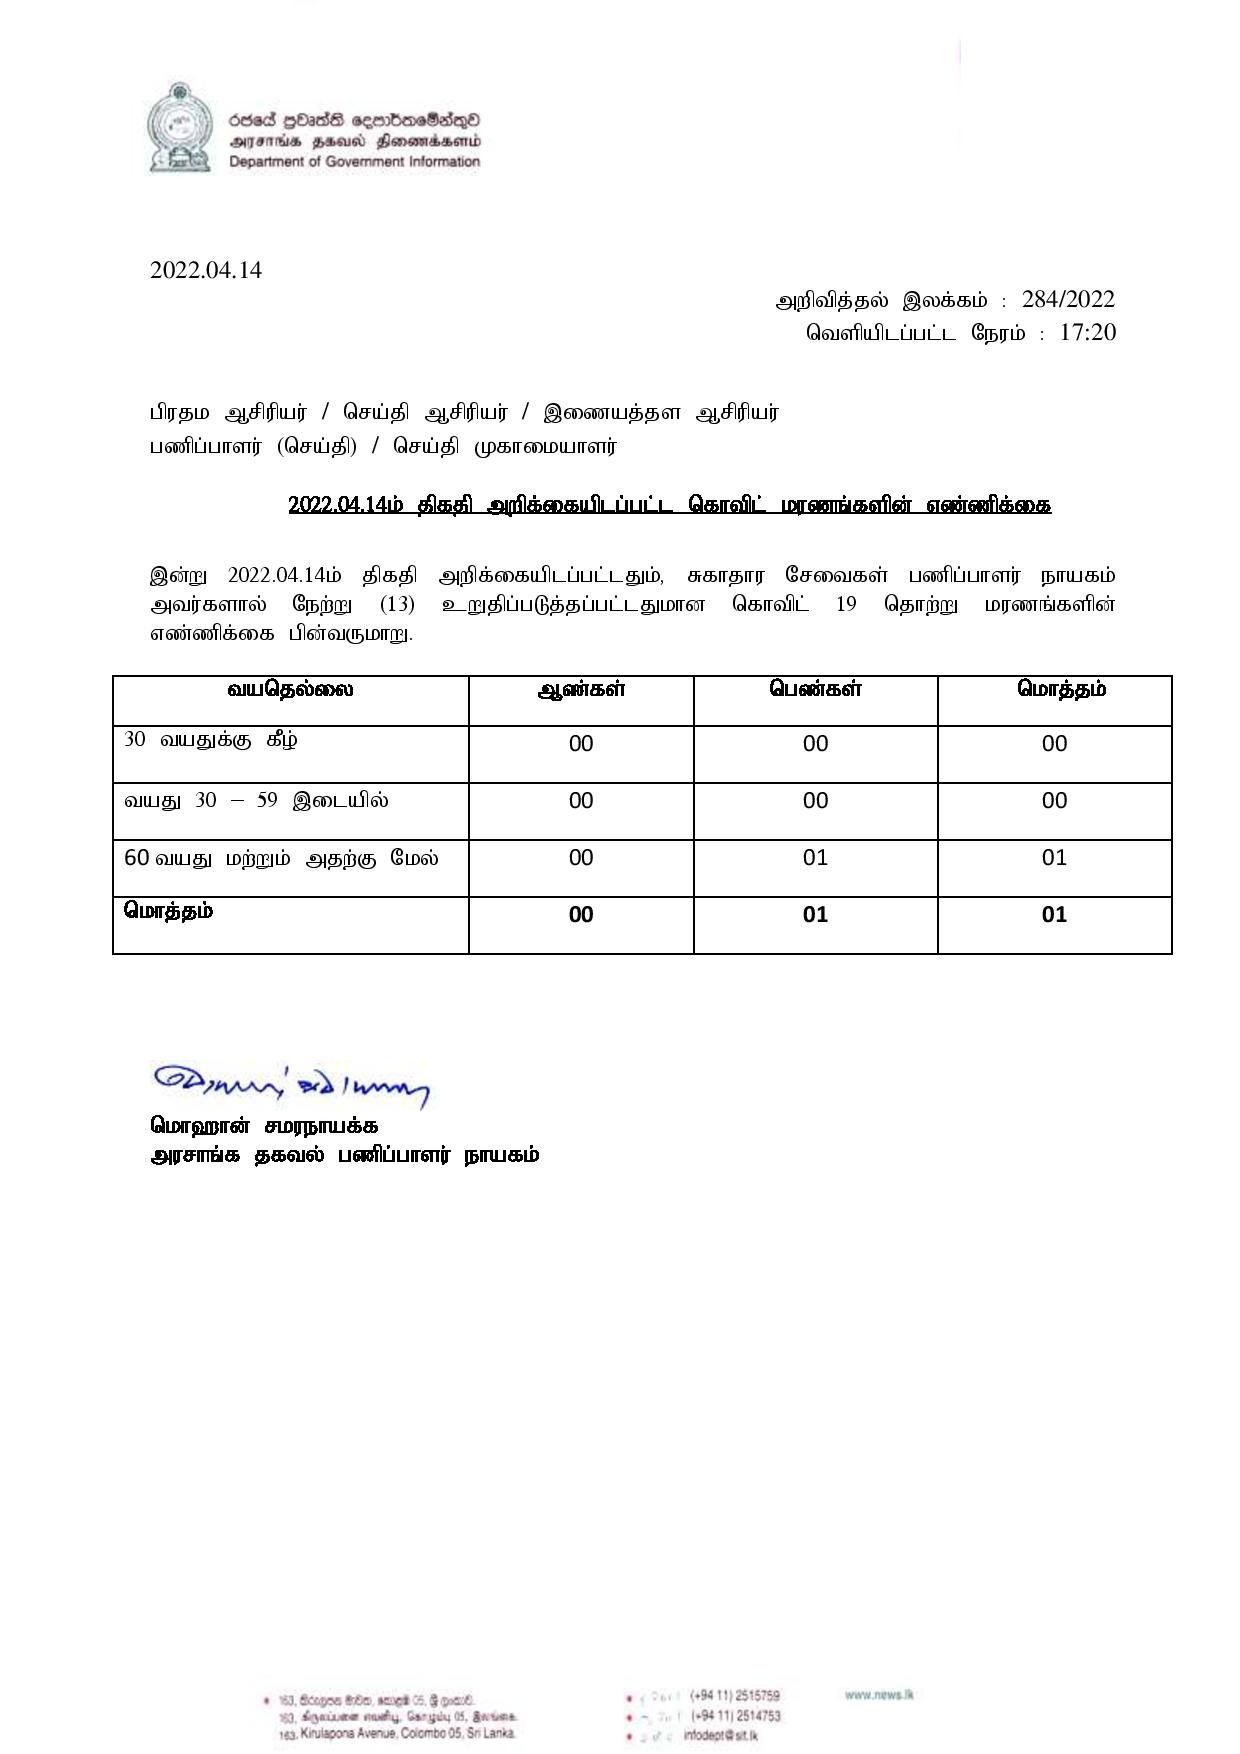 Press Release 284 Tamil page 001